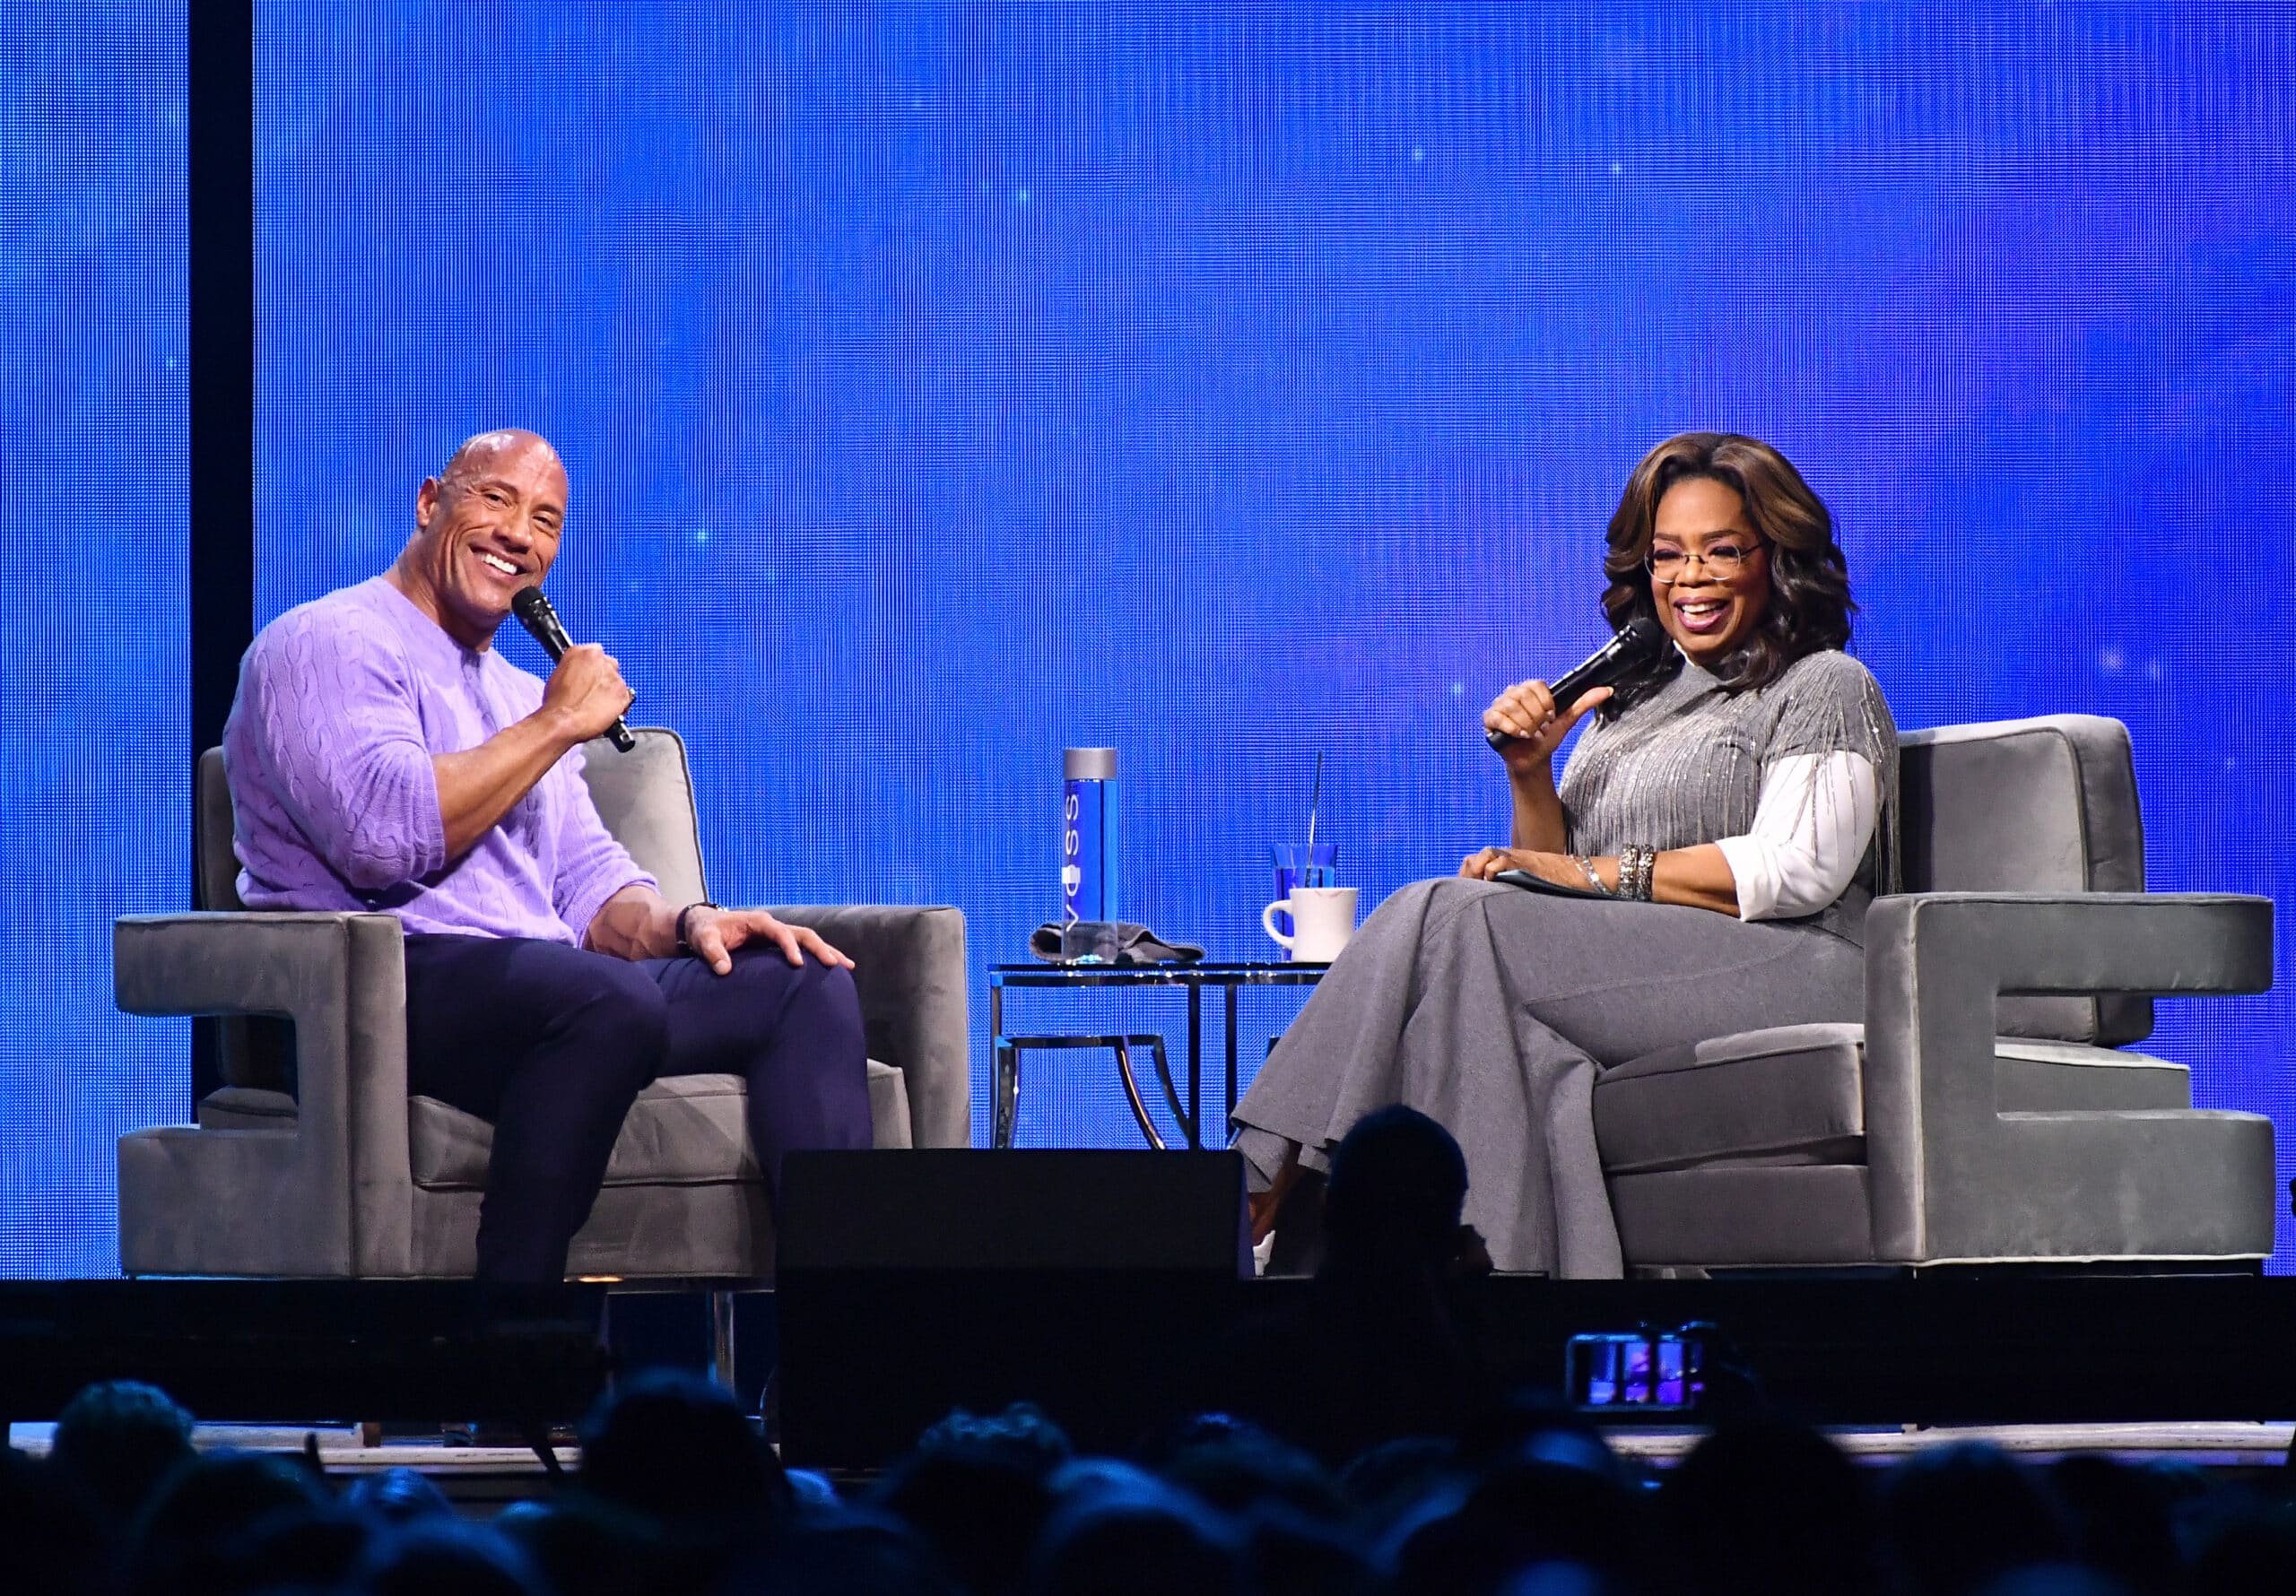 ATLANTA, GEORGIA - JANUARY 25: (EXCLUSIVE COVERAGE) Dwayne Johnson and Oprah Winfrey onstage during Oprah's 2020 Vision: Your Life in Focus Tour presented by WW